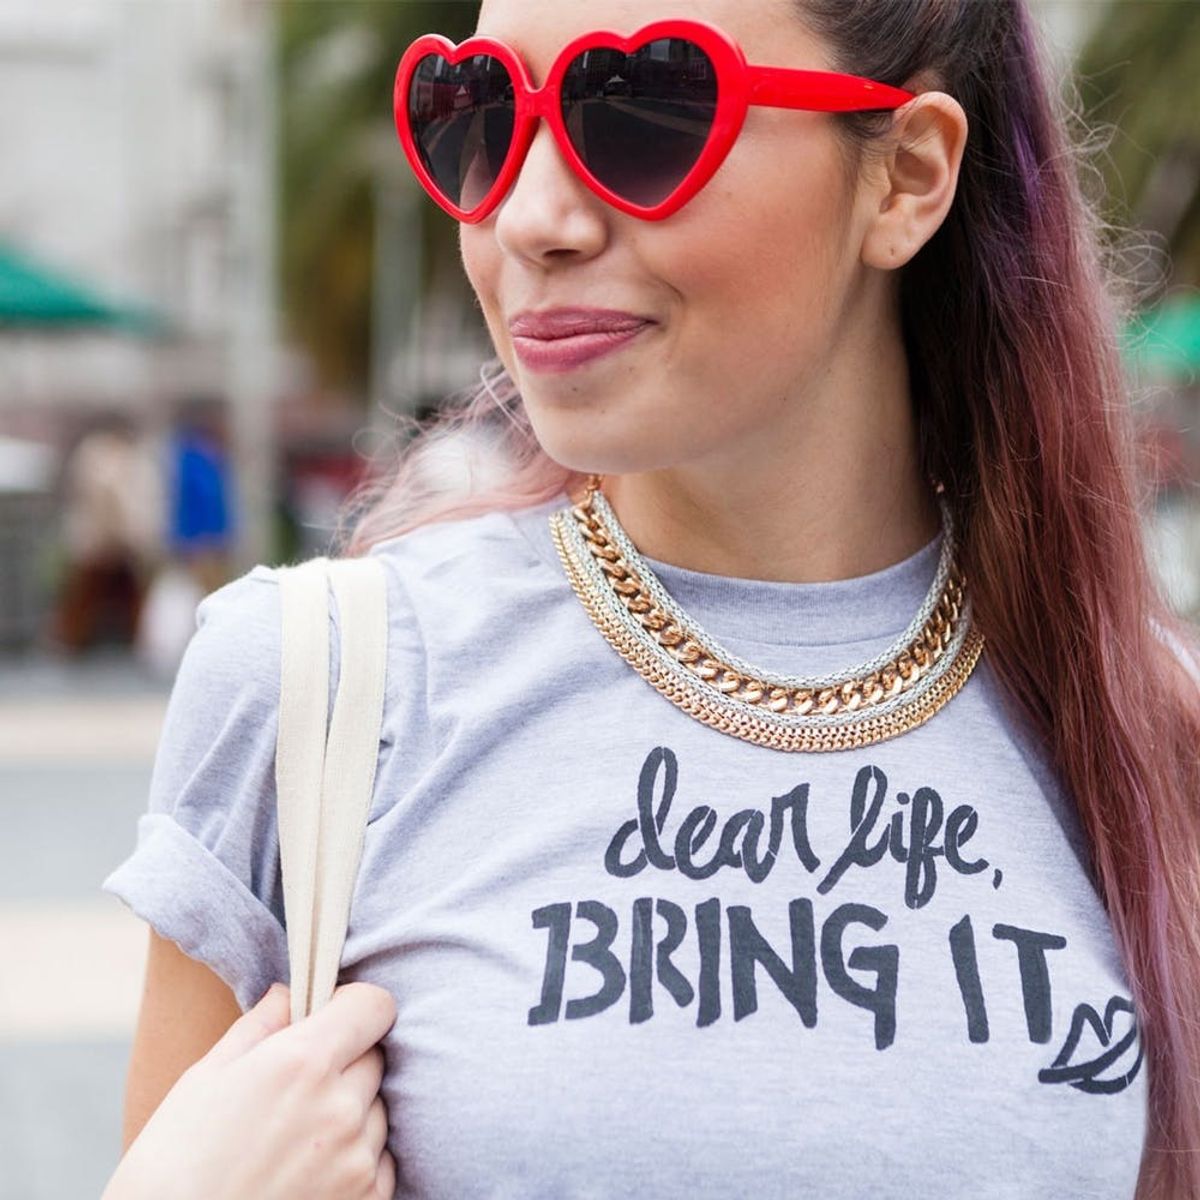 DIY This Motivational T-Shirt to Keep Your Goals in Check